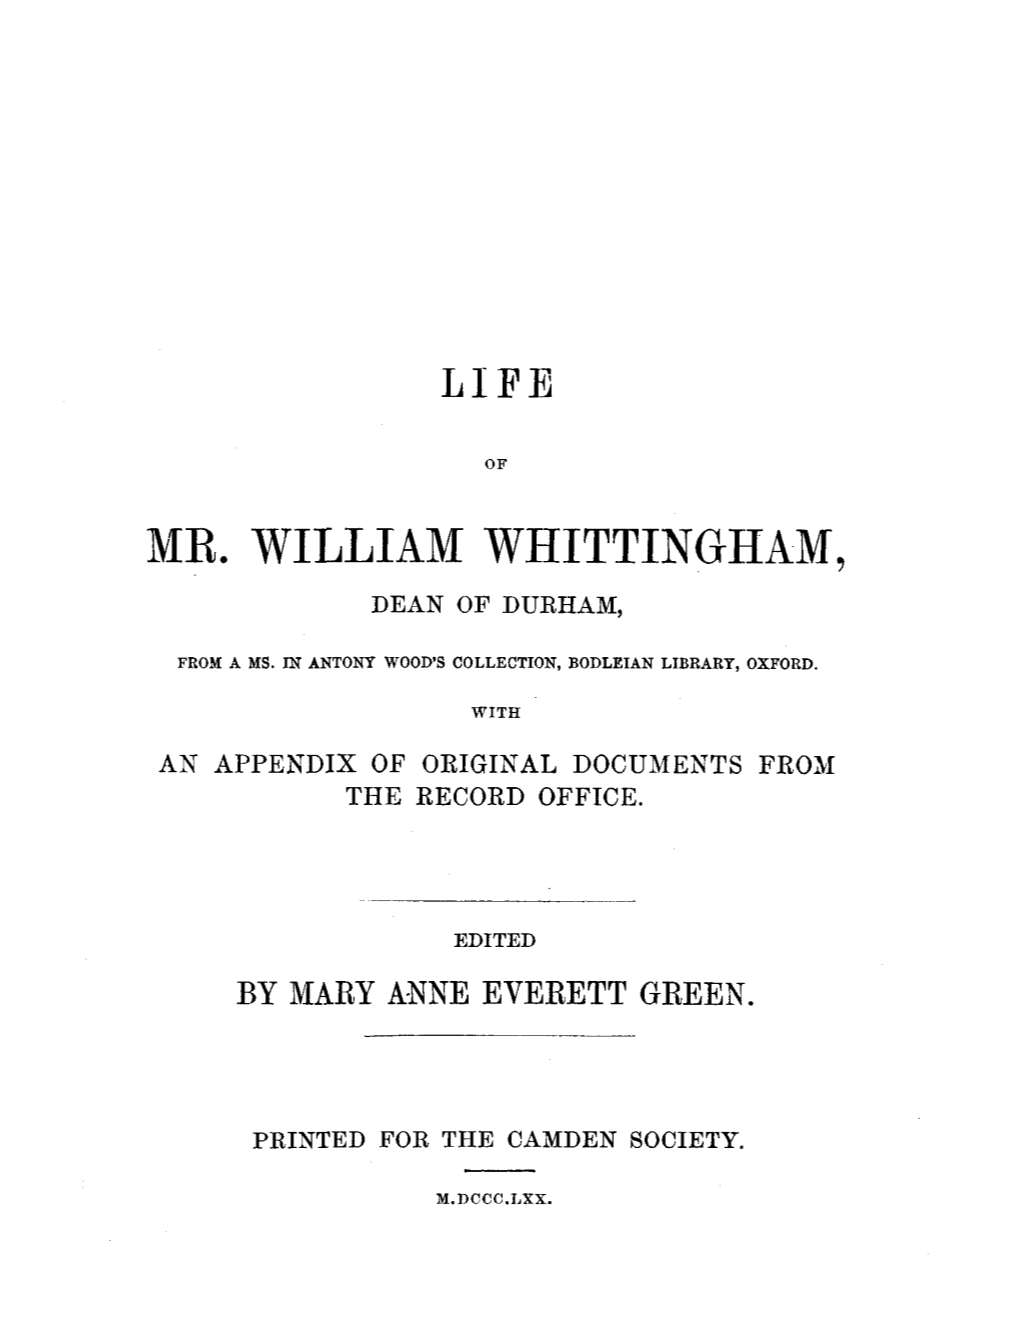 The Life and Death of Mr. William Whittingham, Deane of Durham, Who Departed This Life Anno Domini 1579, June 10.1